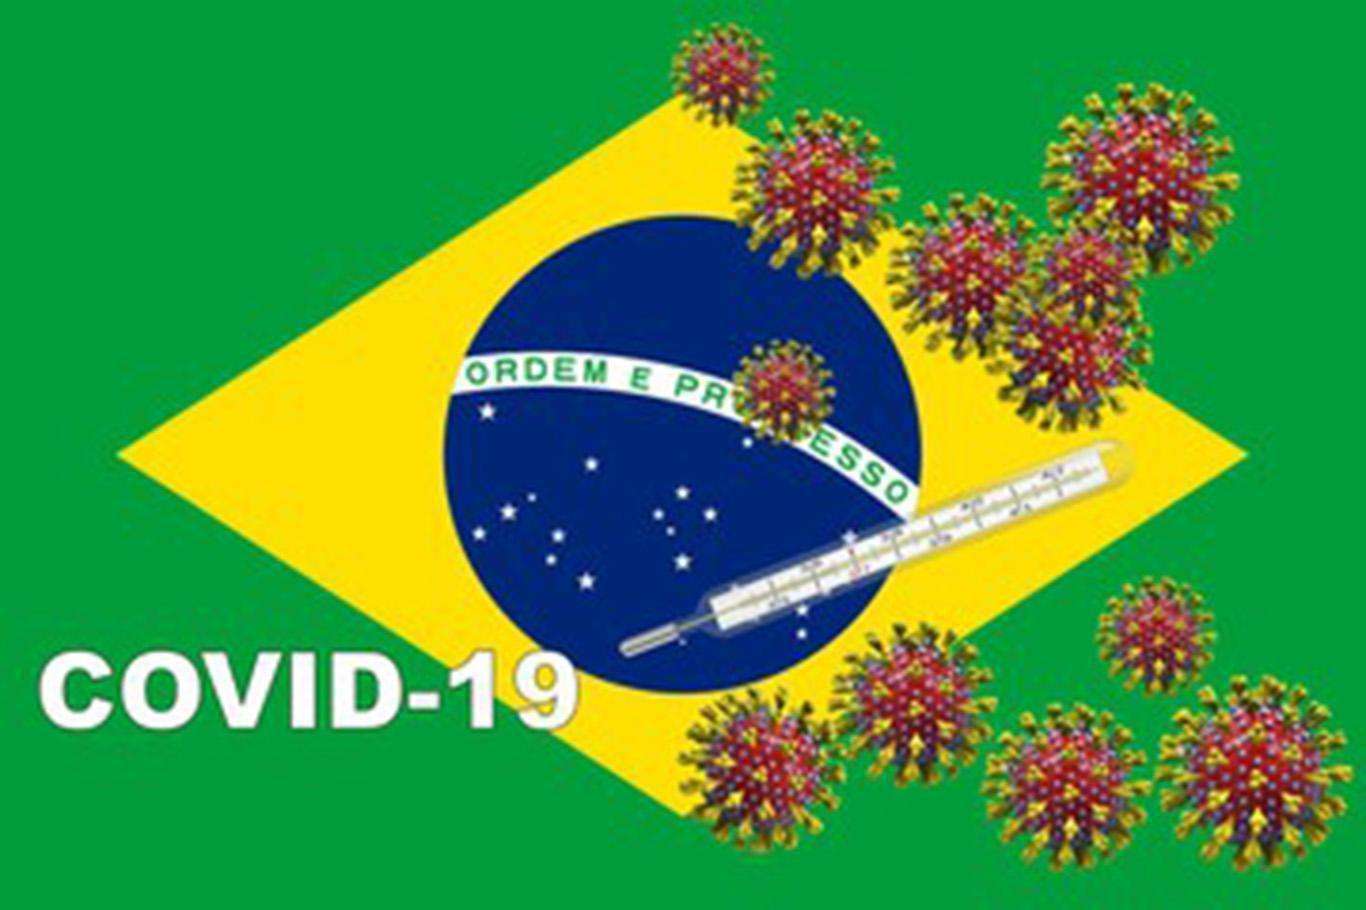 Brazil records 33,269 daily confirmed cases of COVID-19